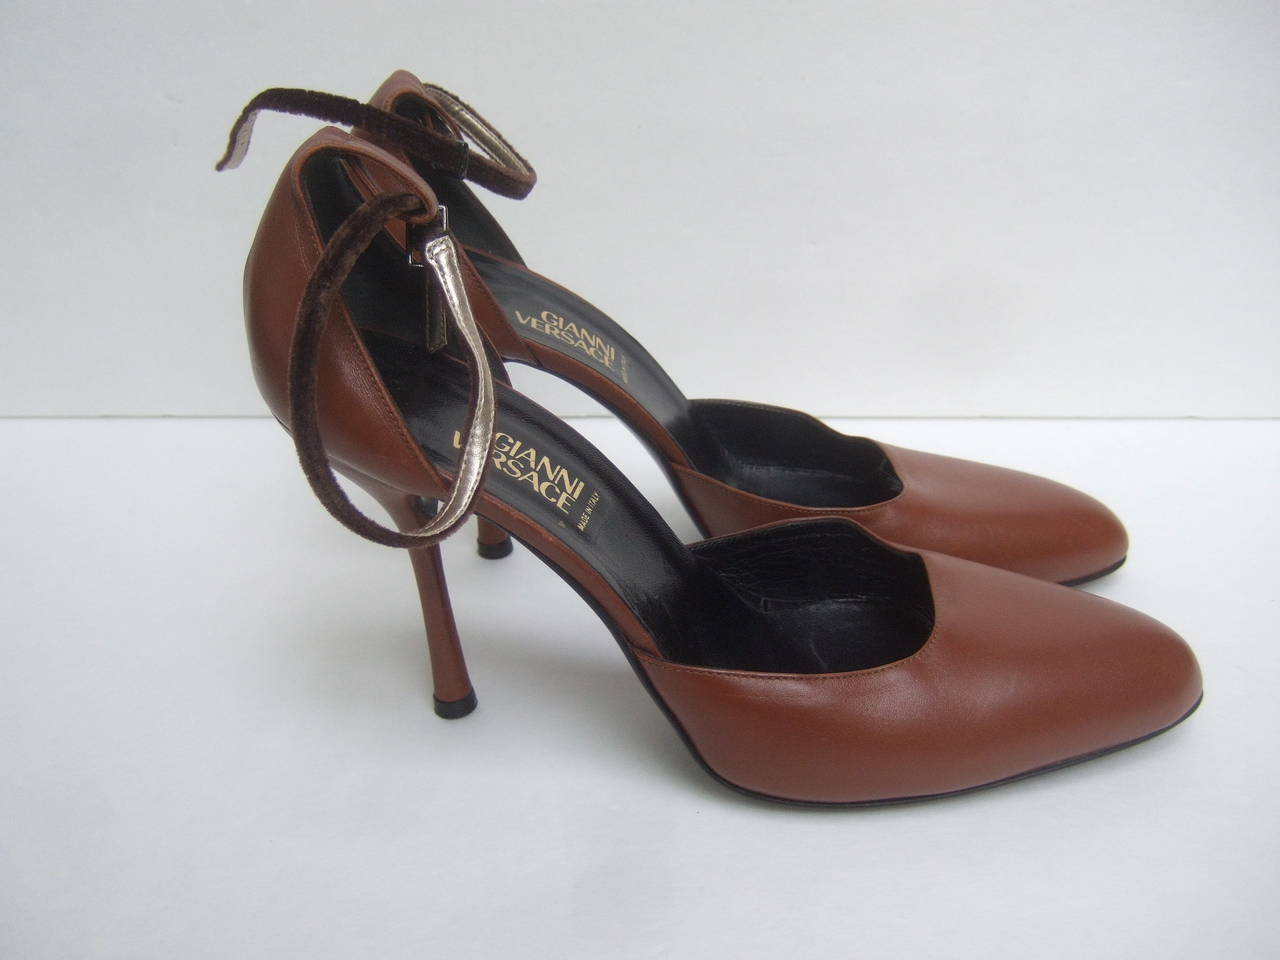 Gianni Versace Caramel brown leather ankle strap pumps Size 41
The stylish Italian pumps are designed with high stiletto heels

Designed by Gianni Versace Made in Italy
Stamped Size 41
The spike heels measure 3